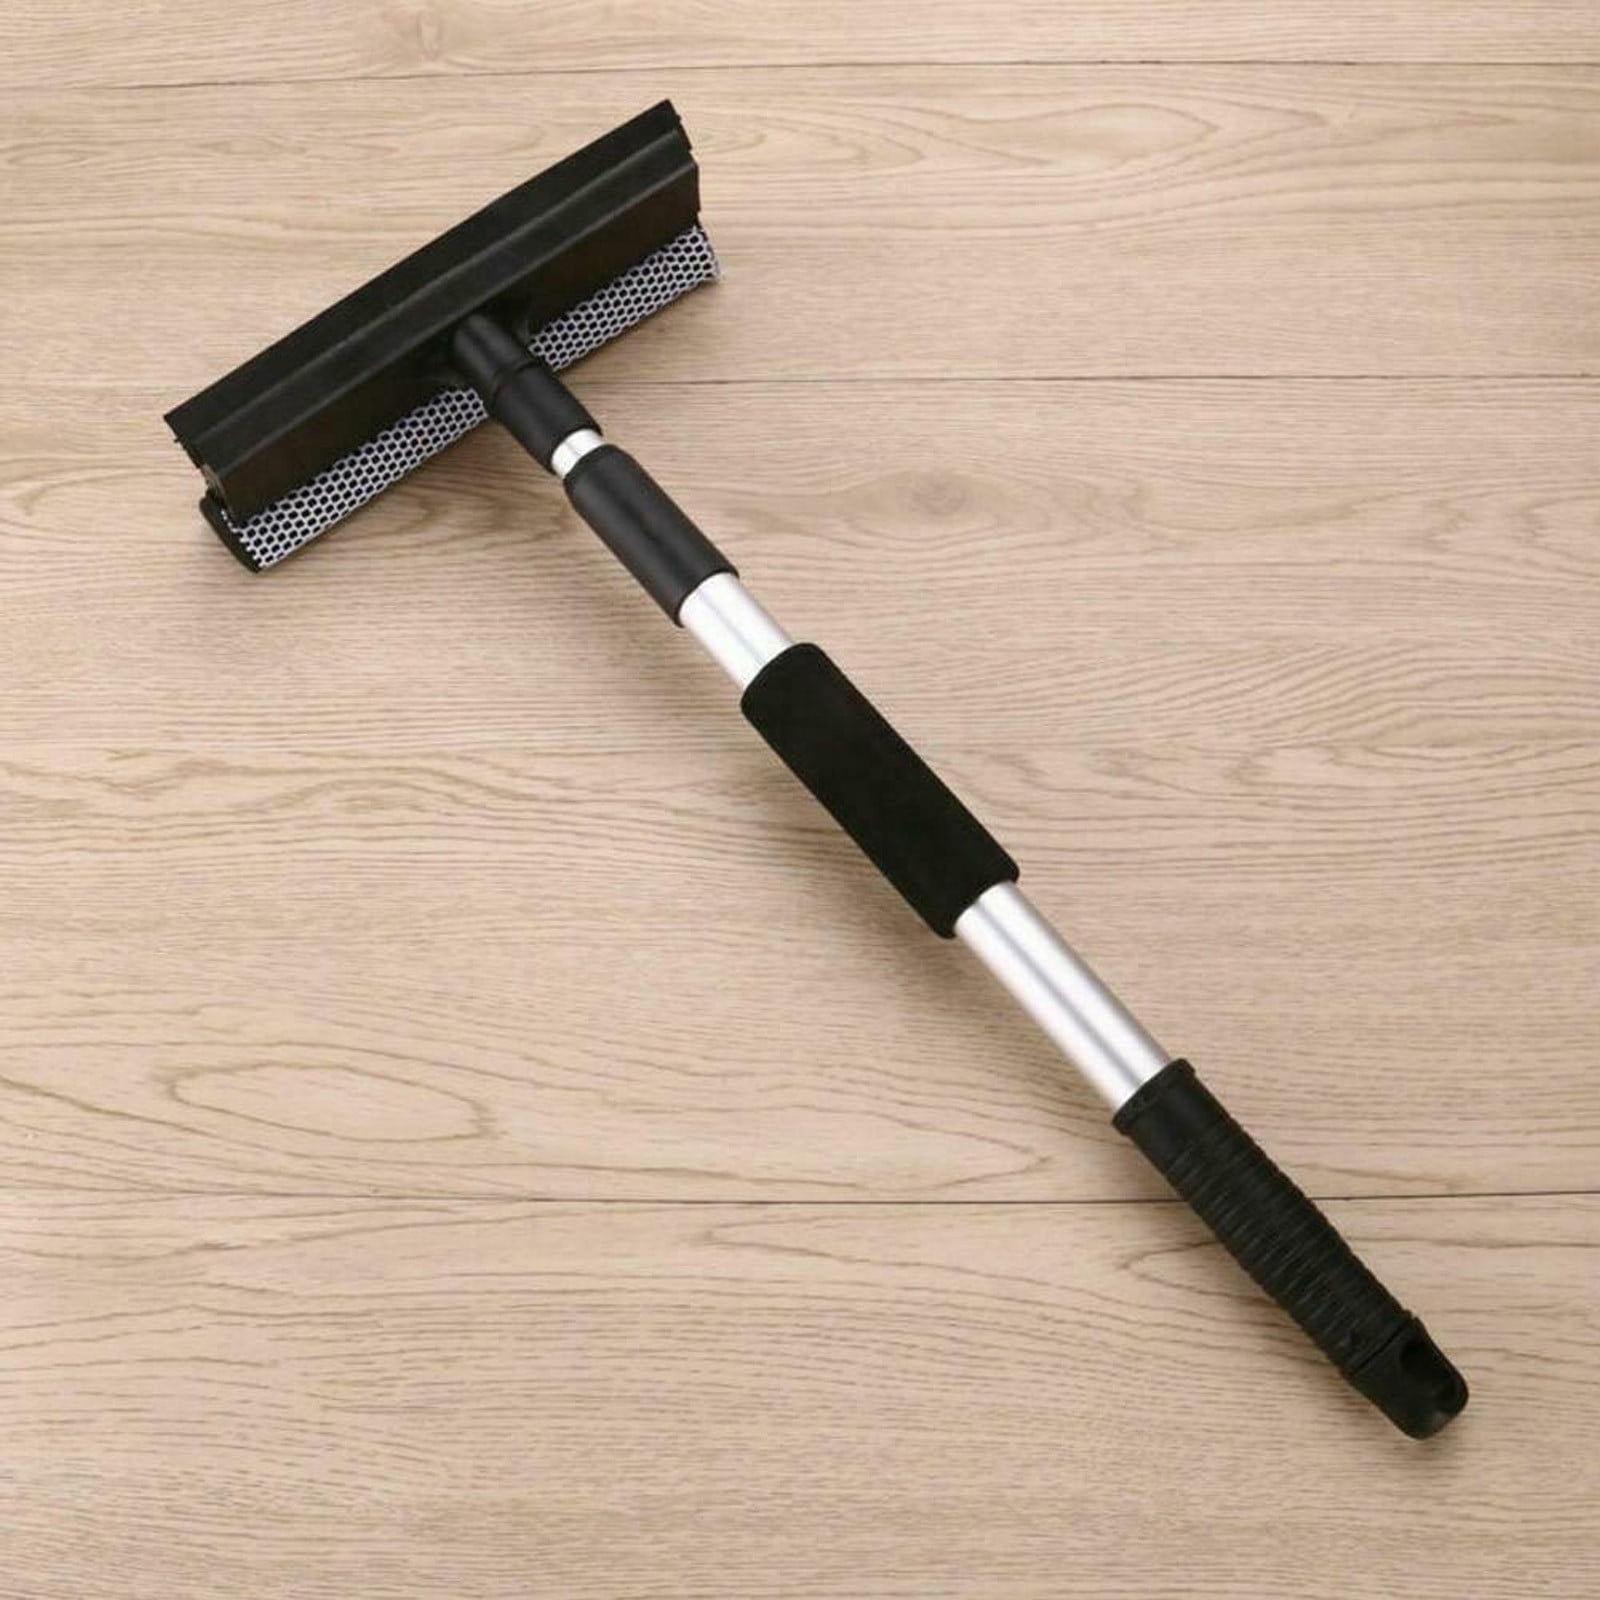 Multi-Use Window Squeegee, 2 in 1 Window Cleaner with Long